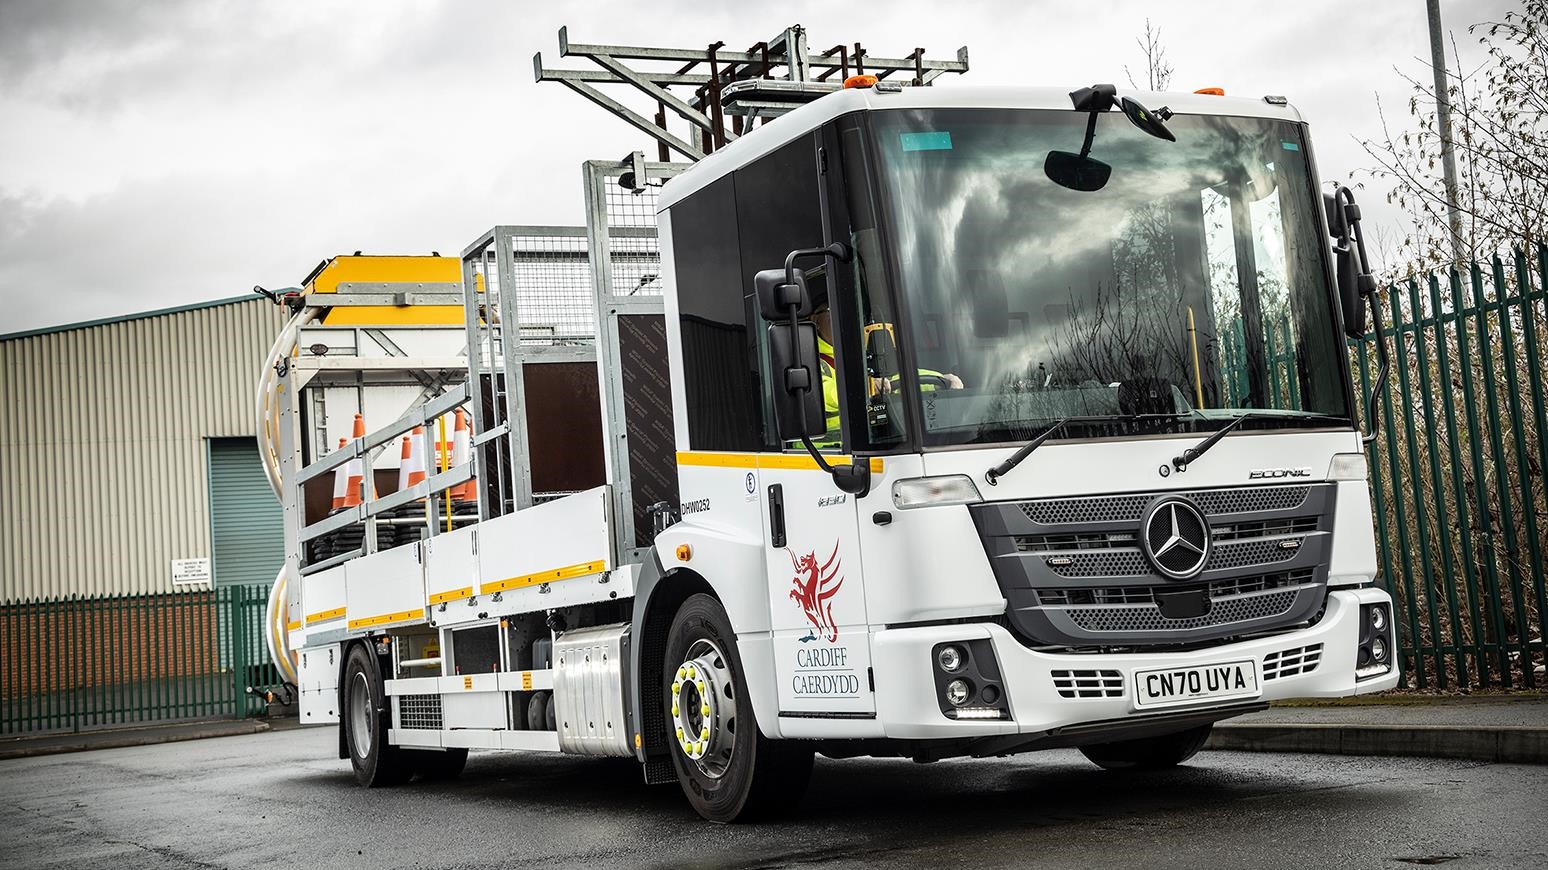 Cardiff Council Adds Two New Mercedes-Benz Econic Traffic Management Trucks With Traffix Scorpion Attenuators & More